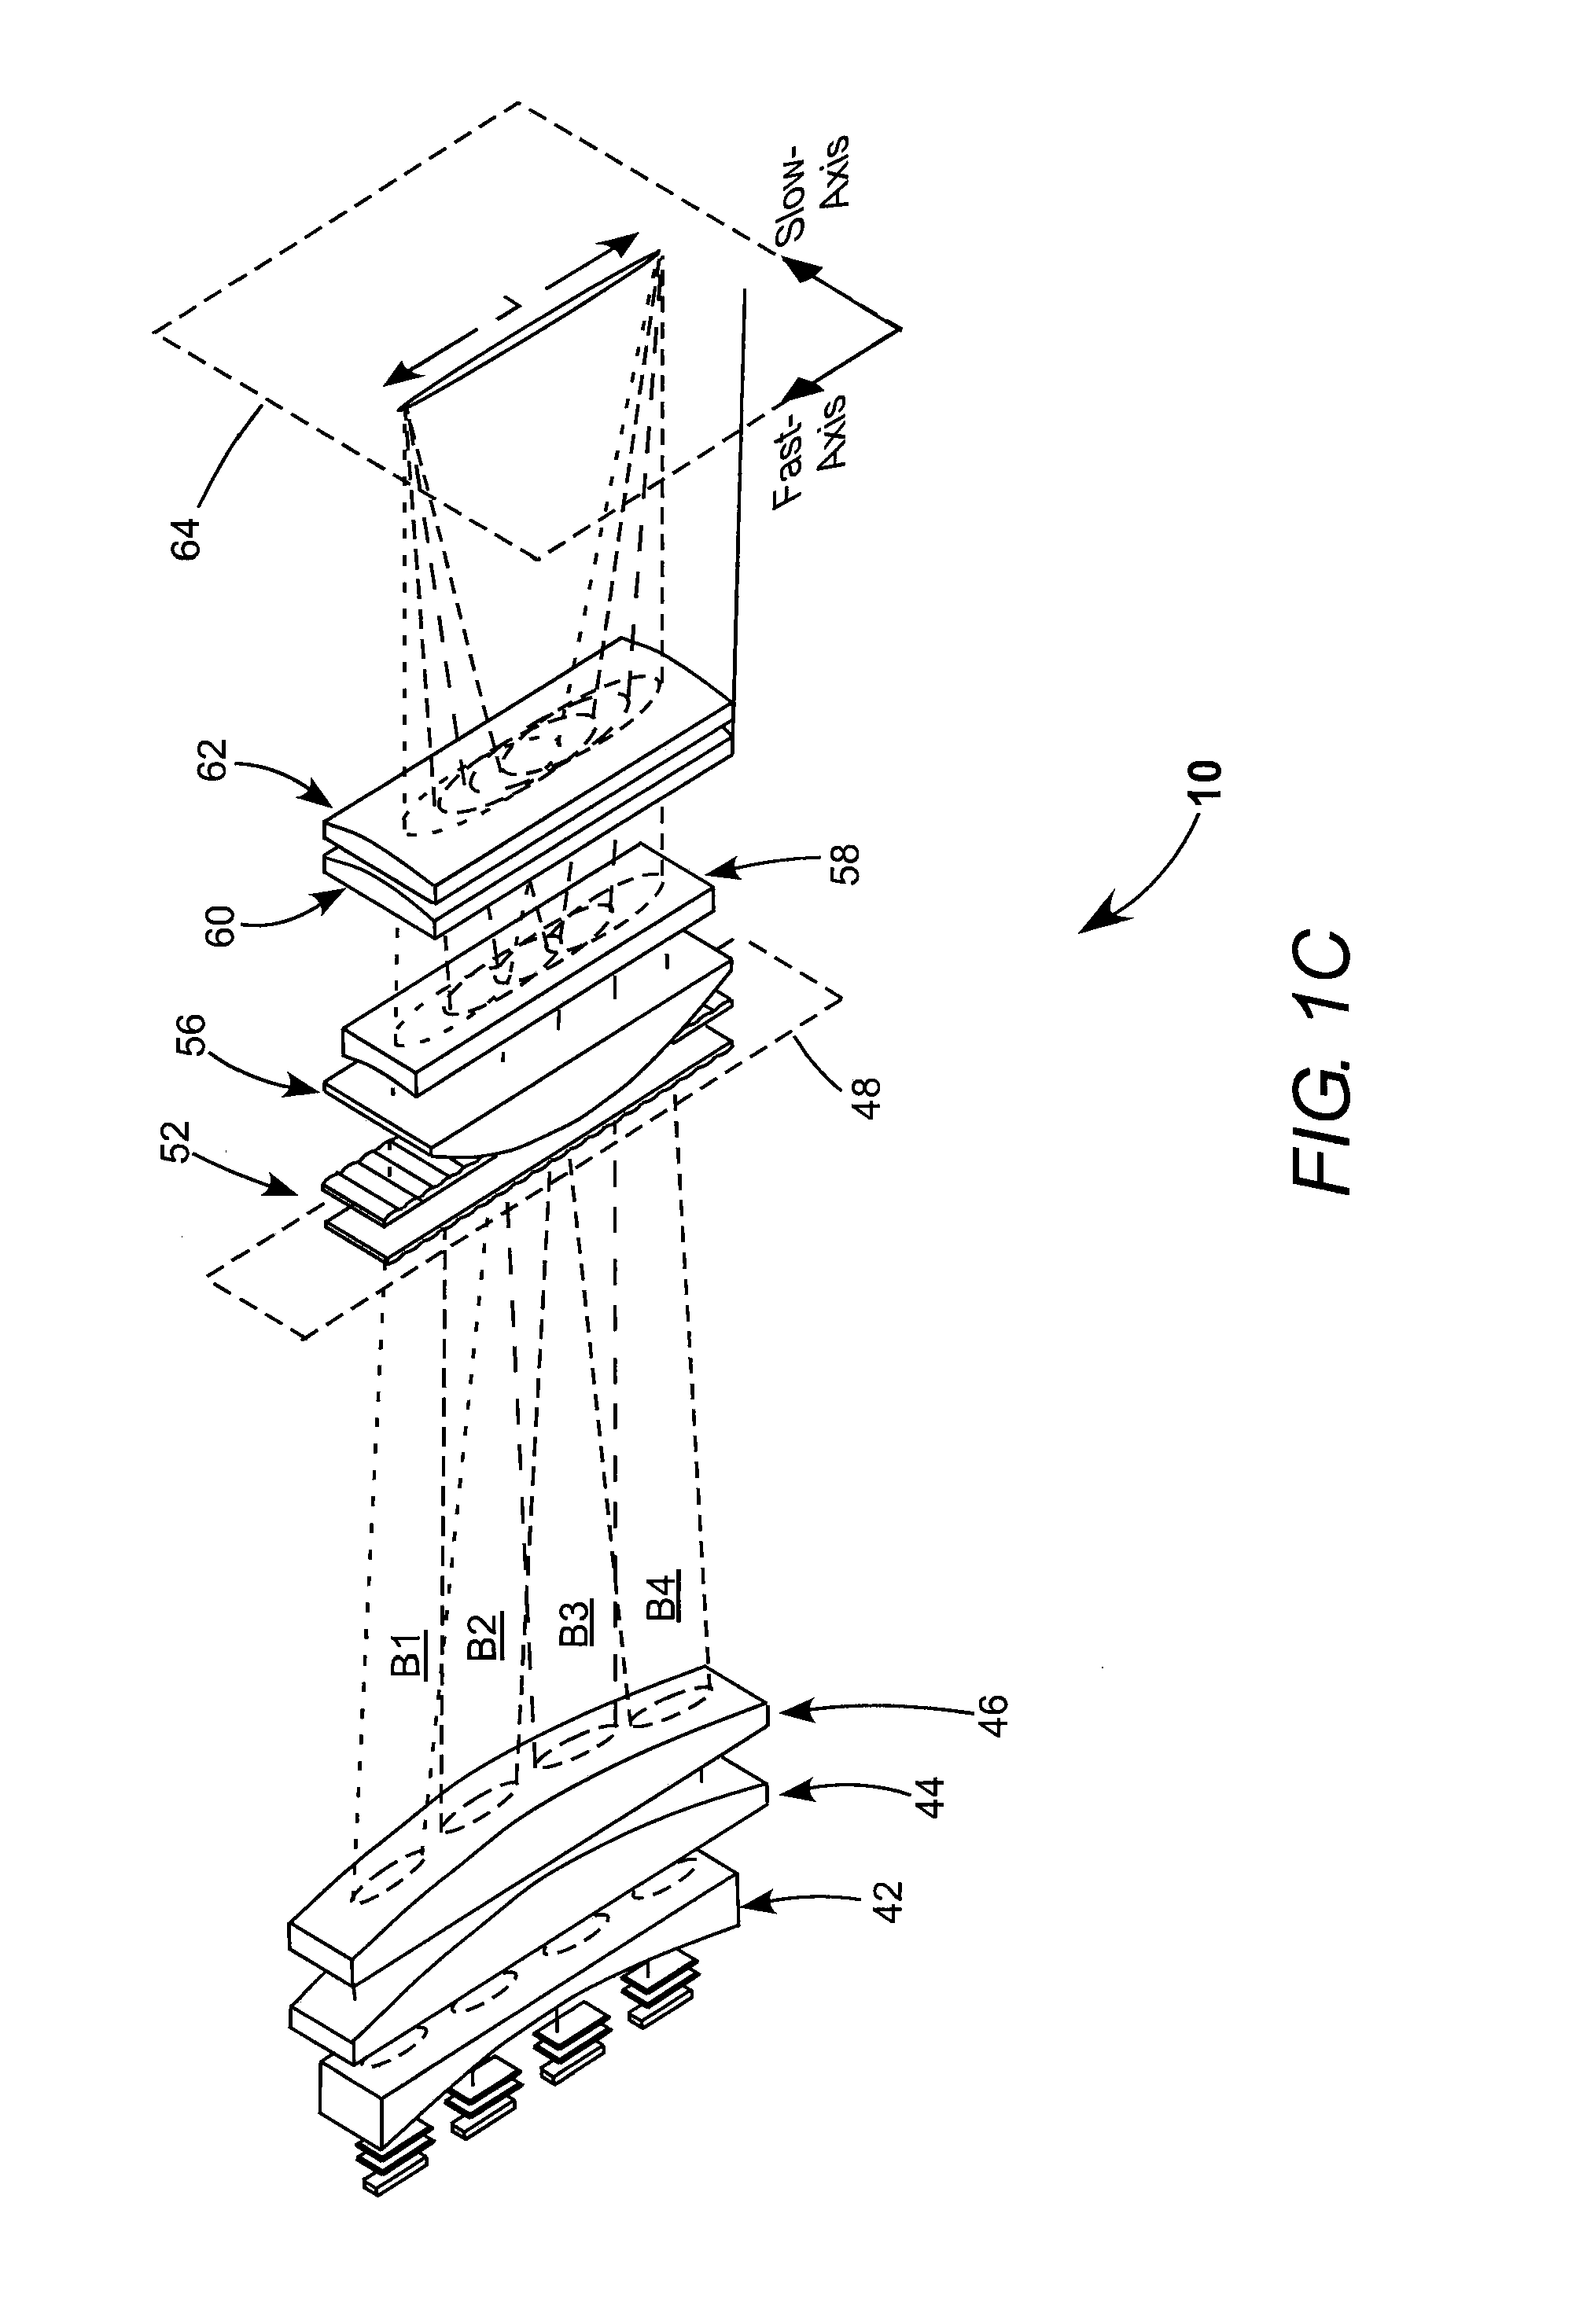 Line-projection apparatus for arrays of diode-laser bar stacks